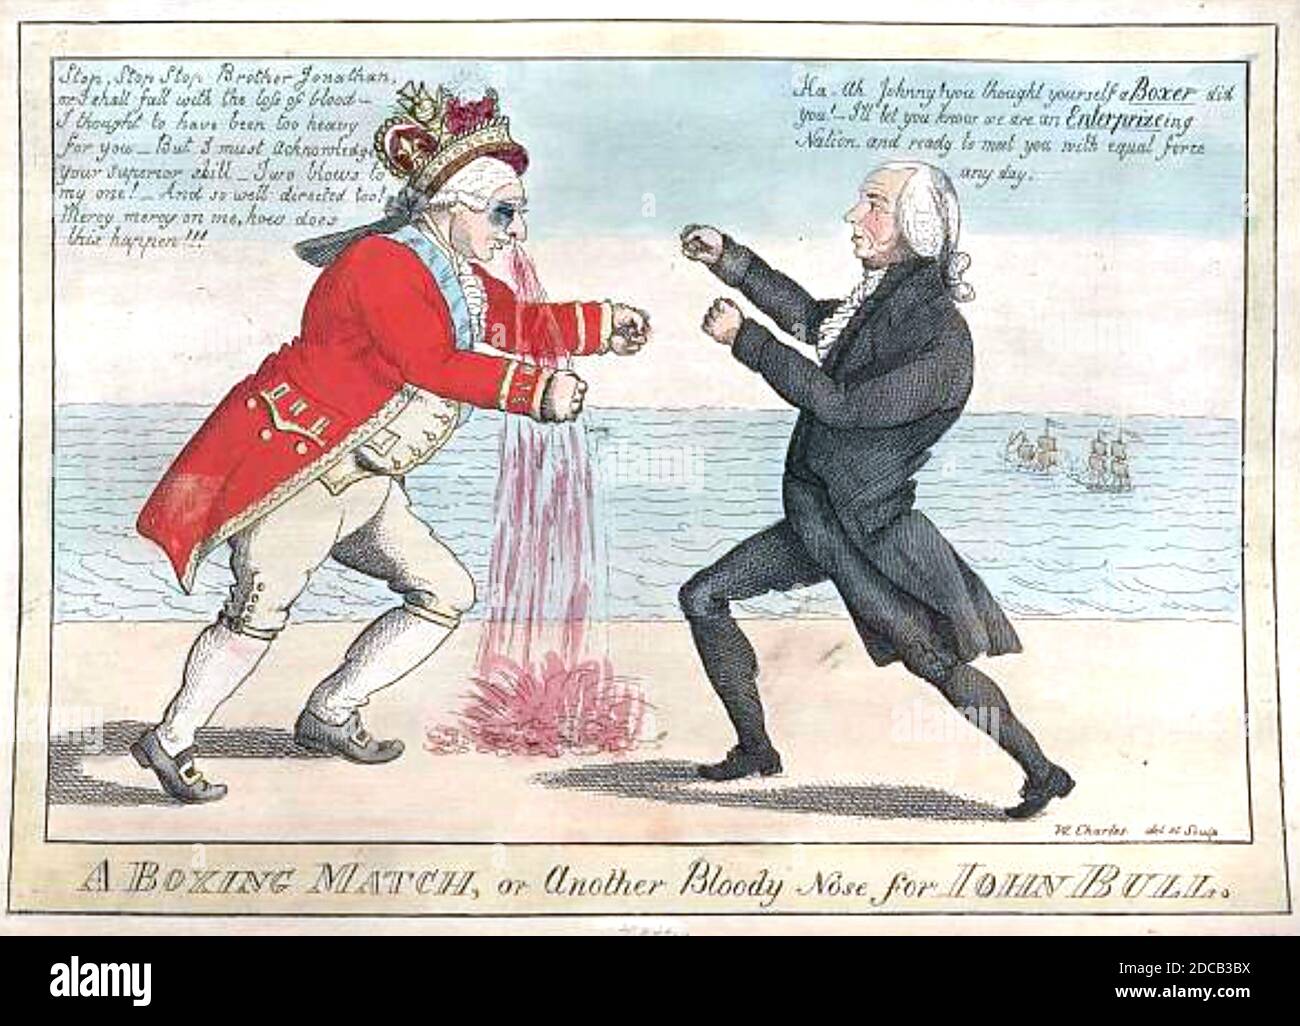 A BOXING MATCH or ANOTHER BLOODY NOSE FOR JOHN BULL by William Charles  published in 1813. The cartoon celebrates American naval successes early in the War of 1812. The English ship Boxer was defeated by the American Enterprise as James Madison tauntingly reminds George III. William Charles (1776-1820) was a Scot who had emigrated to America Stock Photo